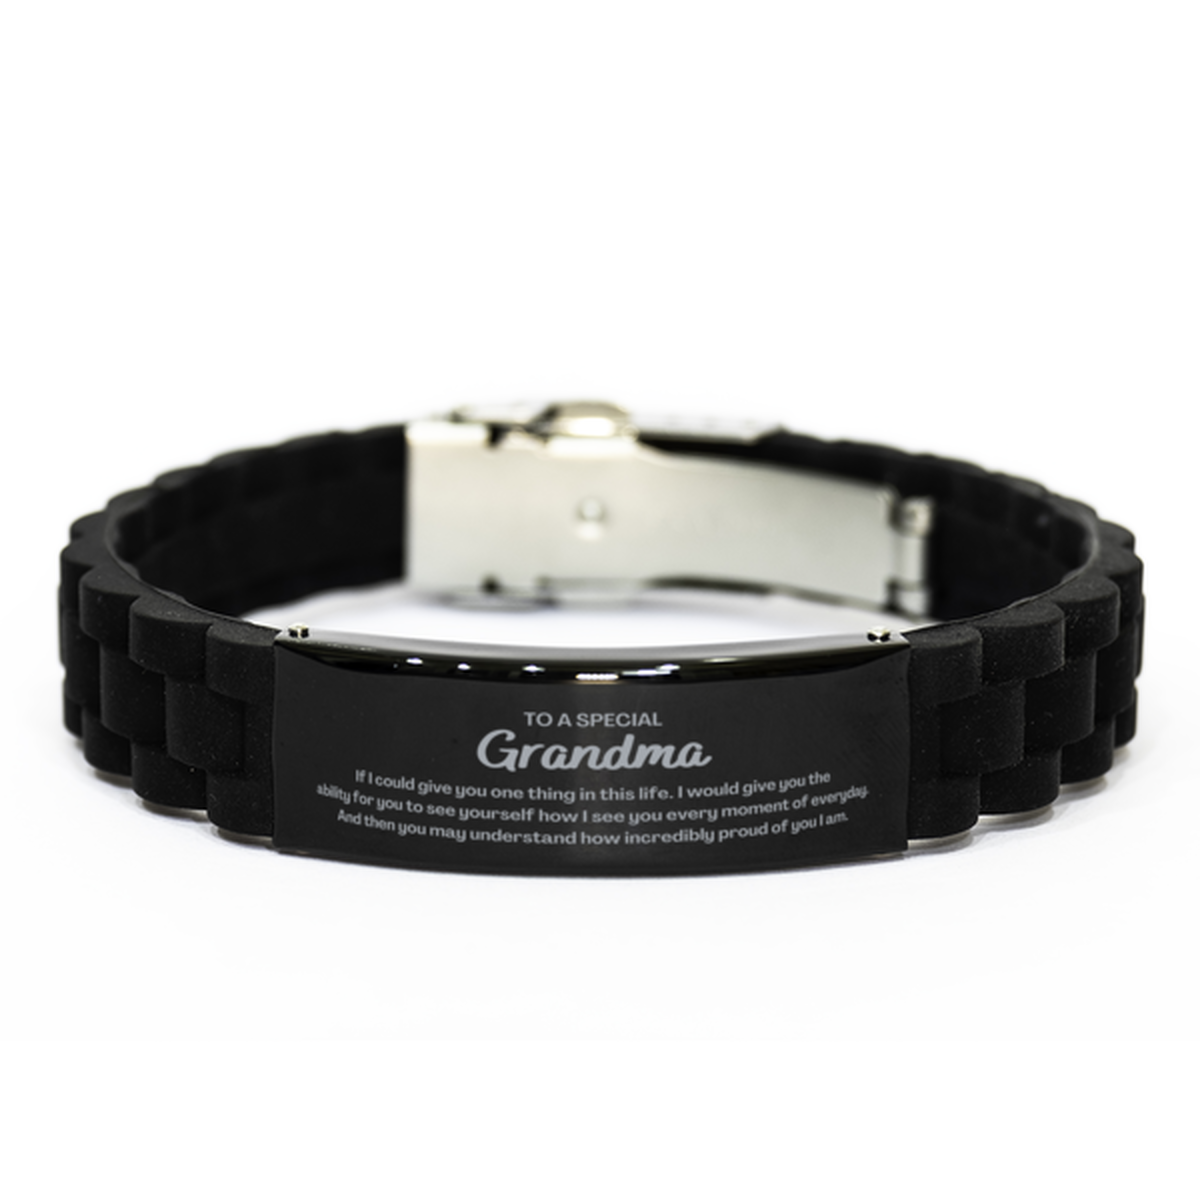 To My Grandma Black Glidelock Clasp Bracelet, Gifts For Grandma Engraved, Inspirational Gifts for Christmas Birthday, Epic Gifts for Grandma To A Special Grandma how incredibly proud of you I am